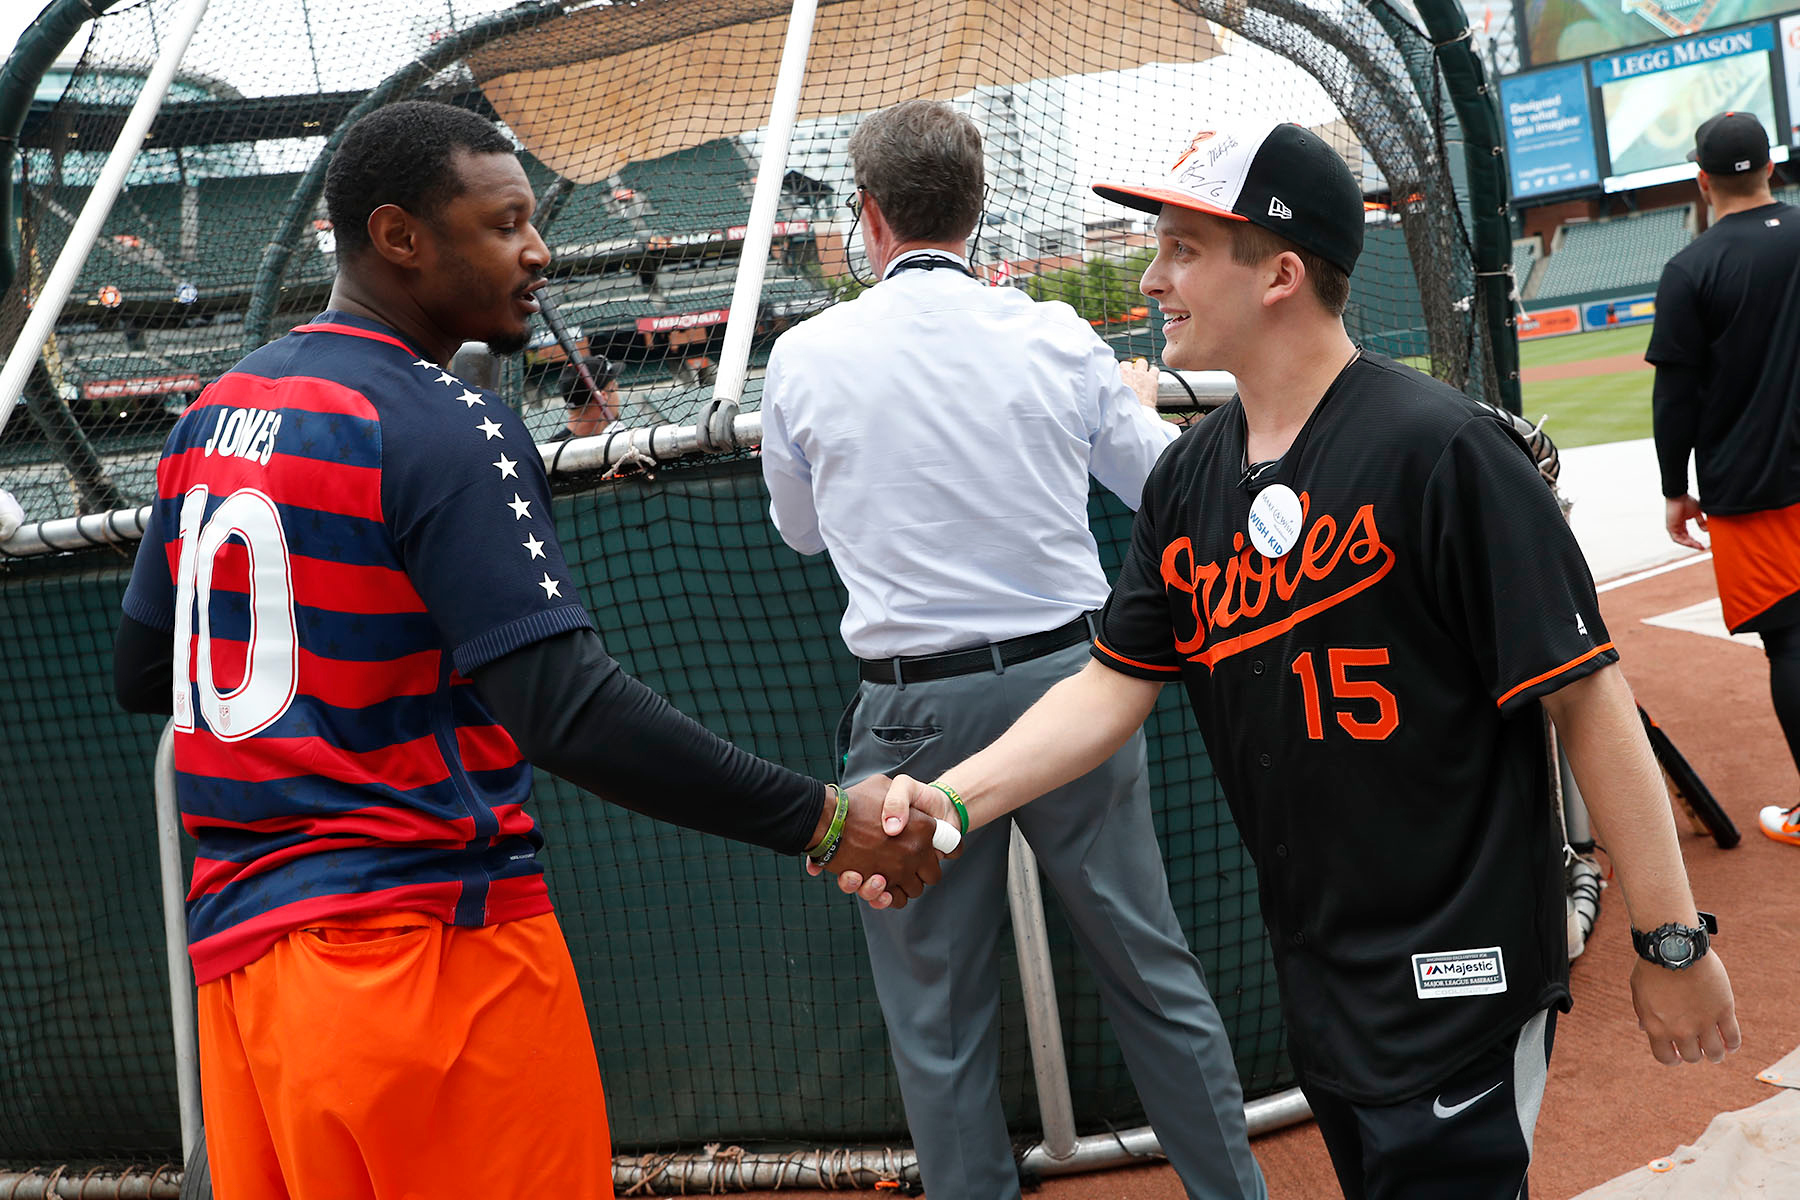 PHOTO: Jimmy Martino, 17, who was diagnosed with brain cancer in December 2016, meet Baltimore Orioles' player Adam Jones.